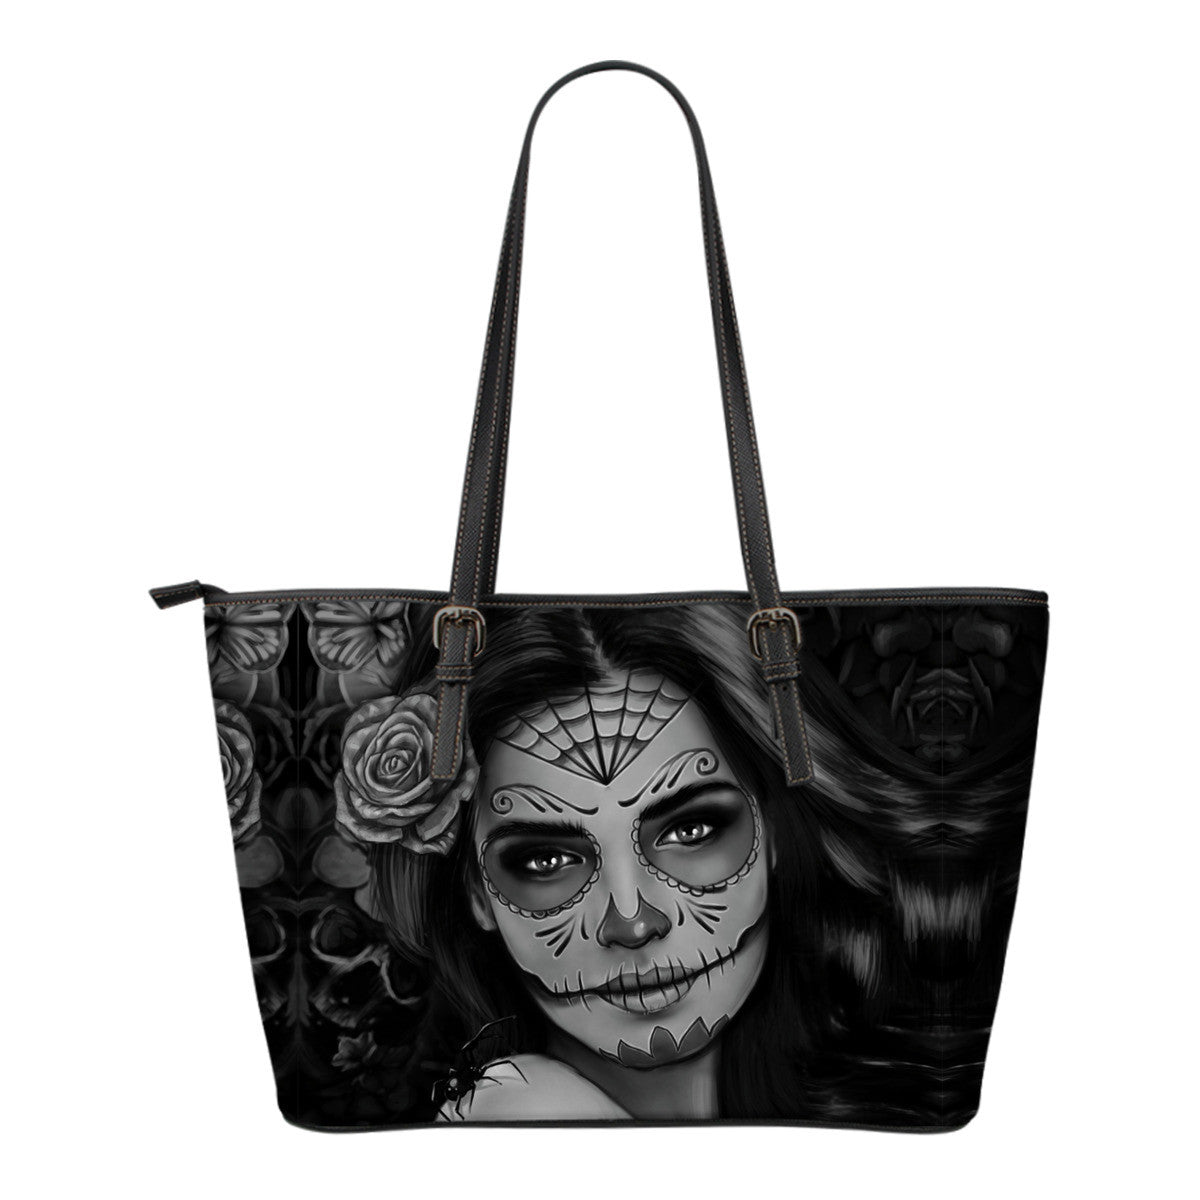 Tattoo Calavera Small Leather Tote Bag - Collection 2